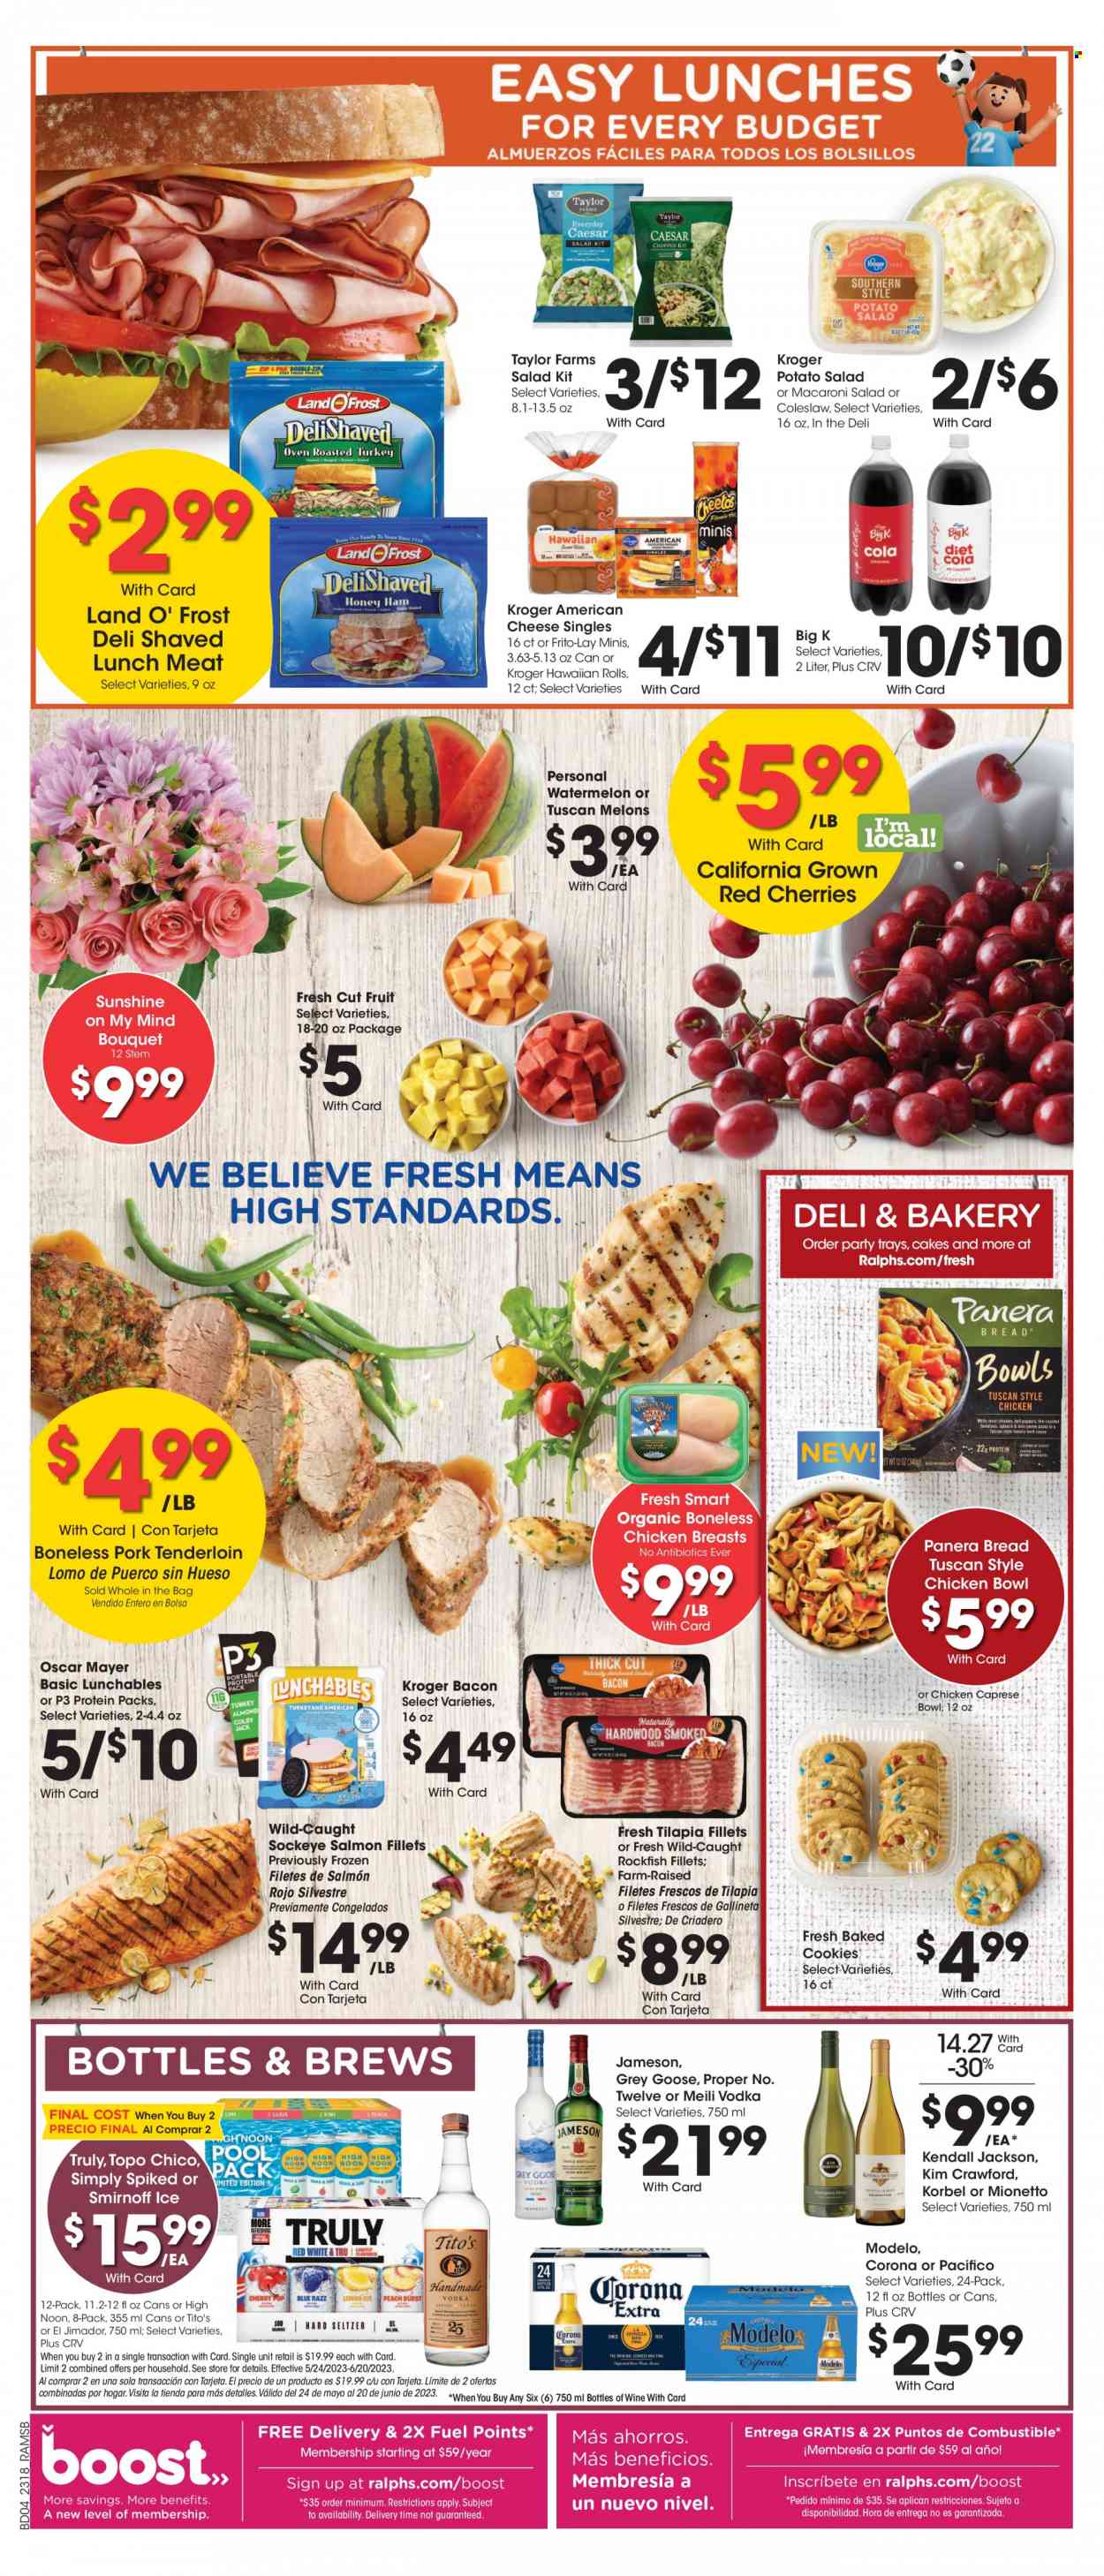 thumbnail - Ralphs Flyer - 05/31/2023 - 06/06/2023 - Sales products - bread, cake, hawaiian rolls, watermelon, cherries, salmon fillet, tilapia, coleslaw, Lunchables, bacon, Oscar Mayer, potato salad, macaroni salad, lunch meat, american cheese, cheese, cookies, Frito-Lay, lemonade, Boost, wine, alcohol, Kim Crawford, Smirnoff, vodka, whiskey, Jameson, TRULY, Corona Extra, Modelo, Topo Chico, chicken breasts, pork meat, pork tenderloin, bouquet, melons. Page 8.